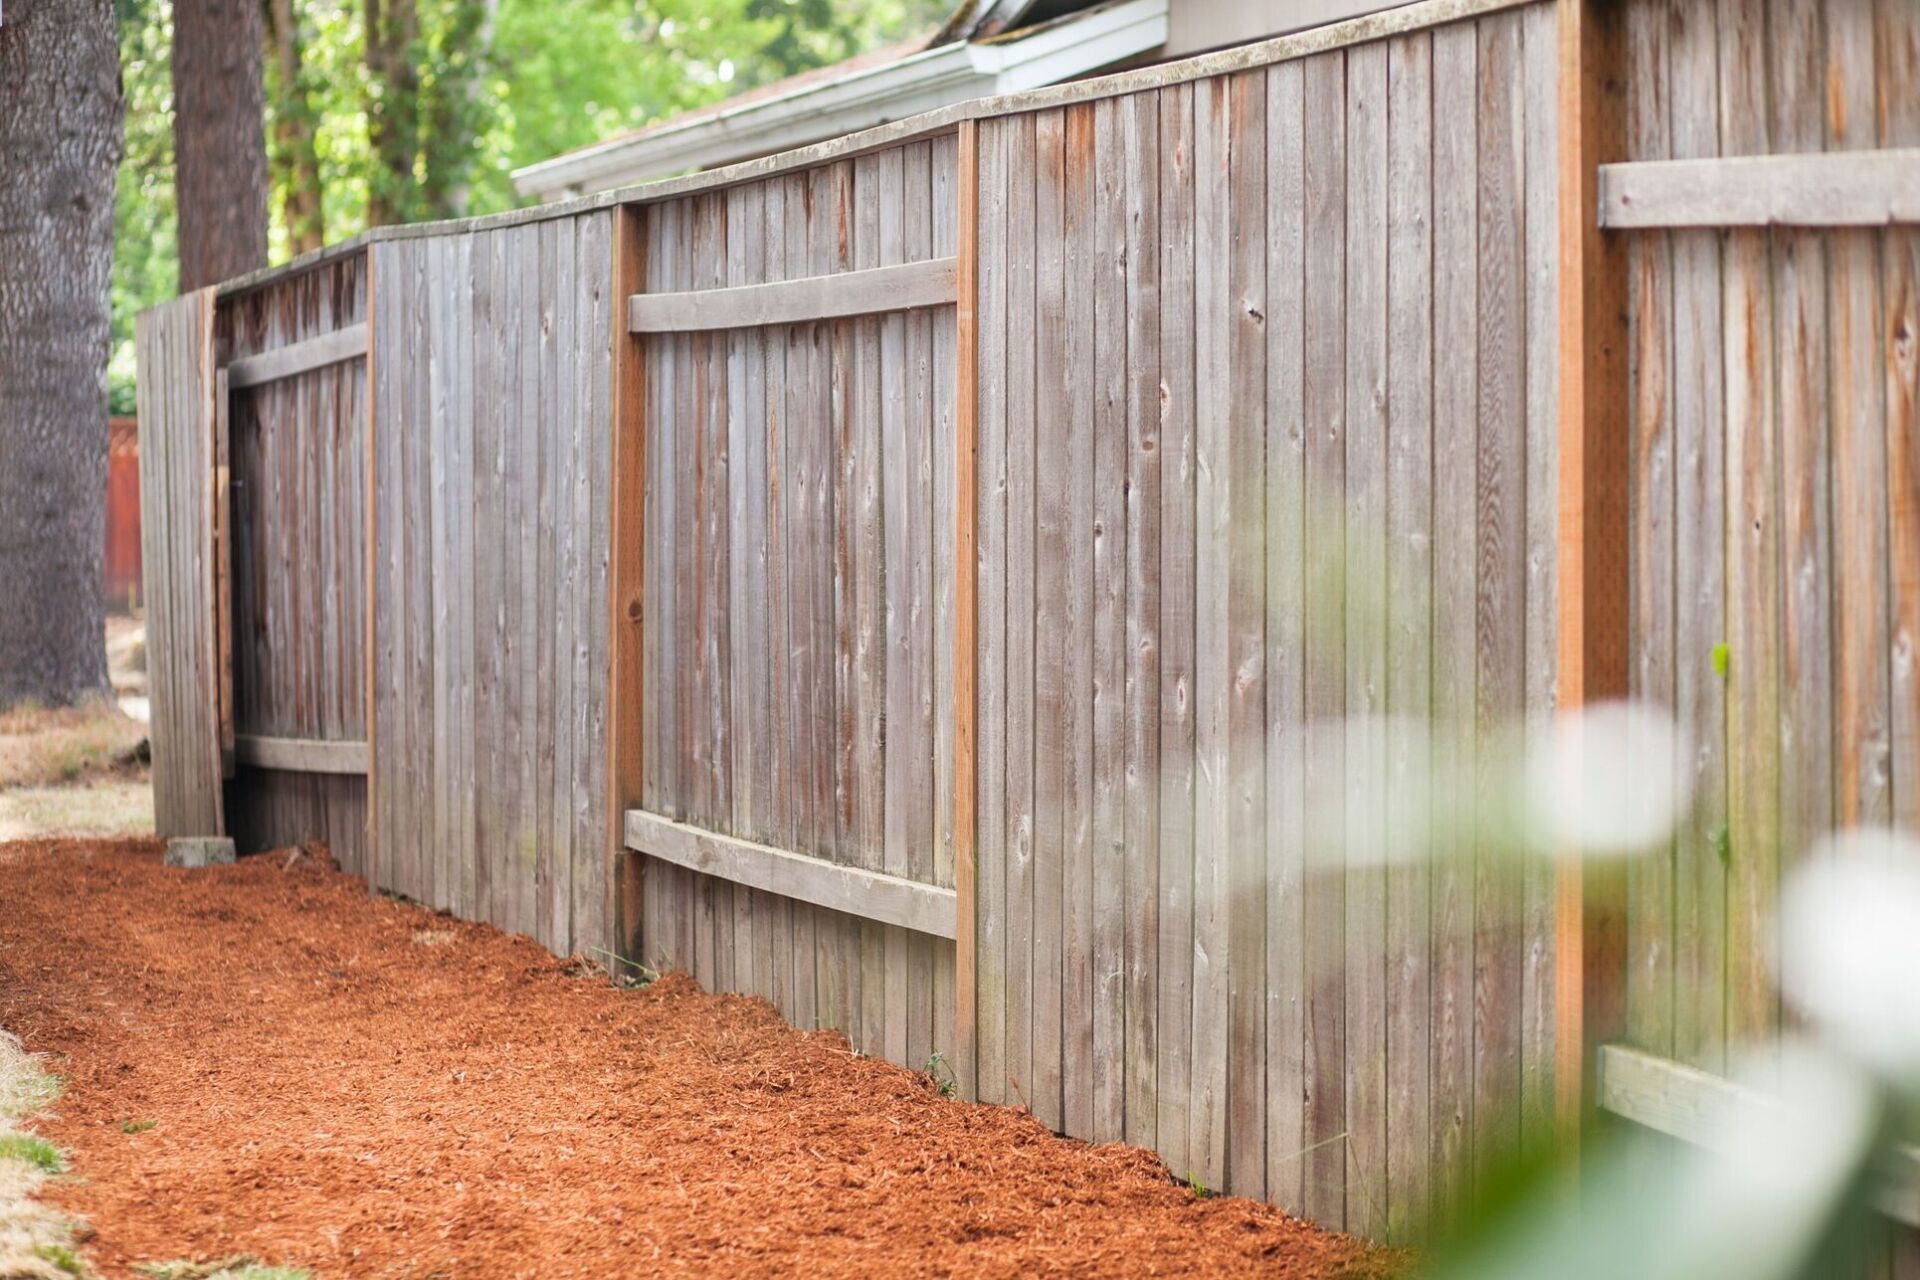 Freshly built wooden fence in backyard built by fence company Greensboro NC